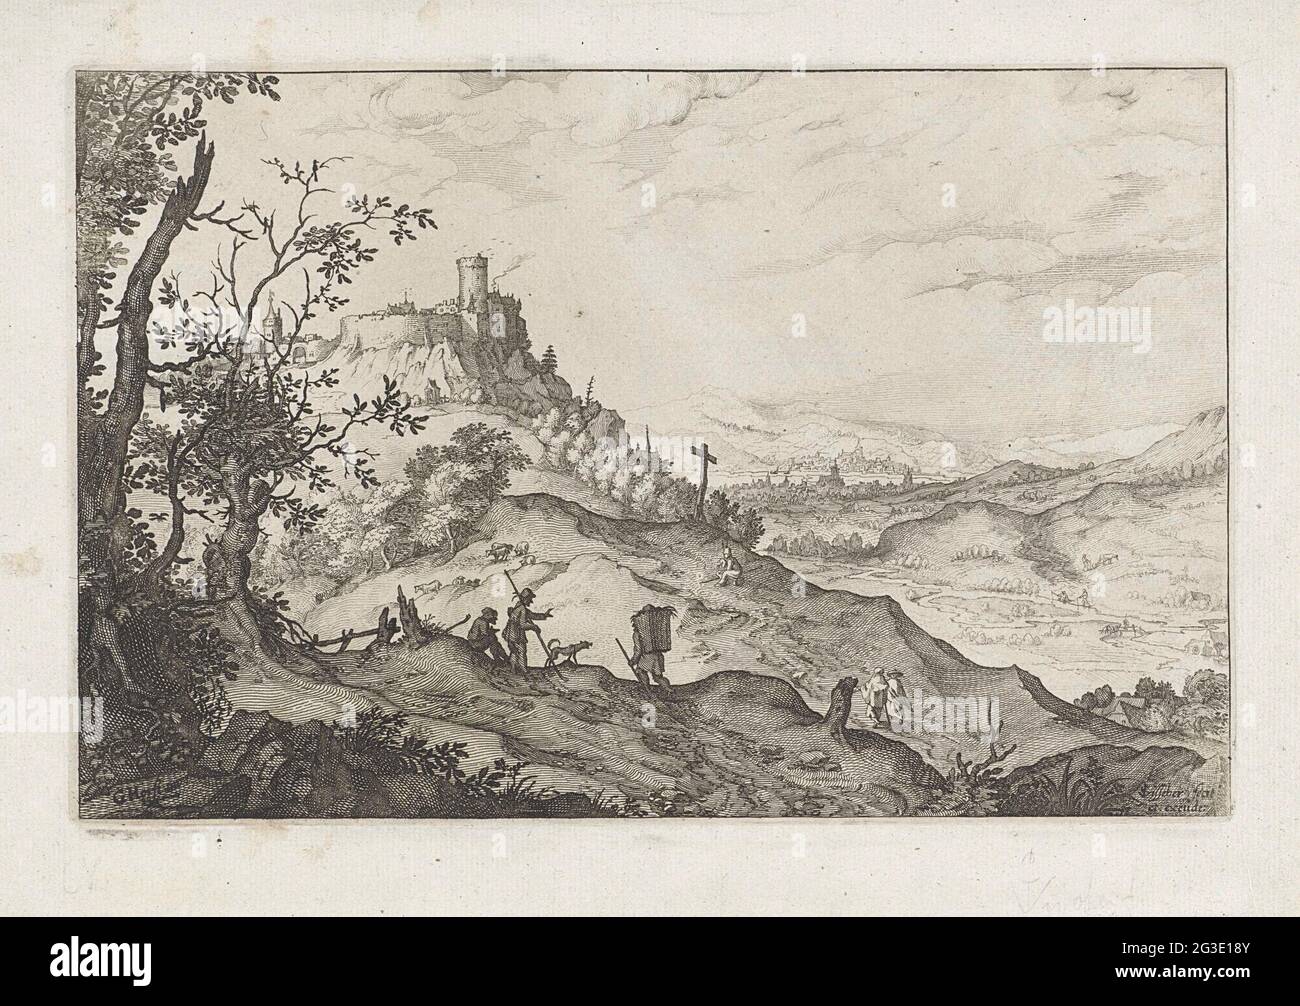 Mountain landscape with hikers and shepherds; Landscape with the fall of Icarus. Mountain landscape with hikers and shepherds. On the left on a hill a walled city with a castle. Due to the valley, a river flows where two fishermen have thrown their rod. Stock Photo